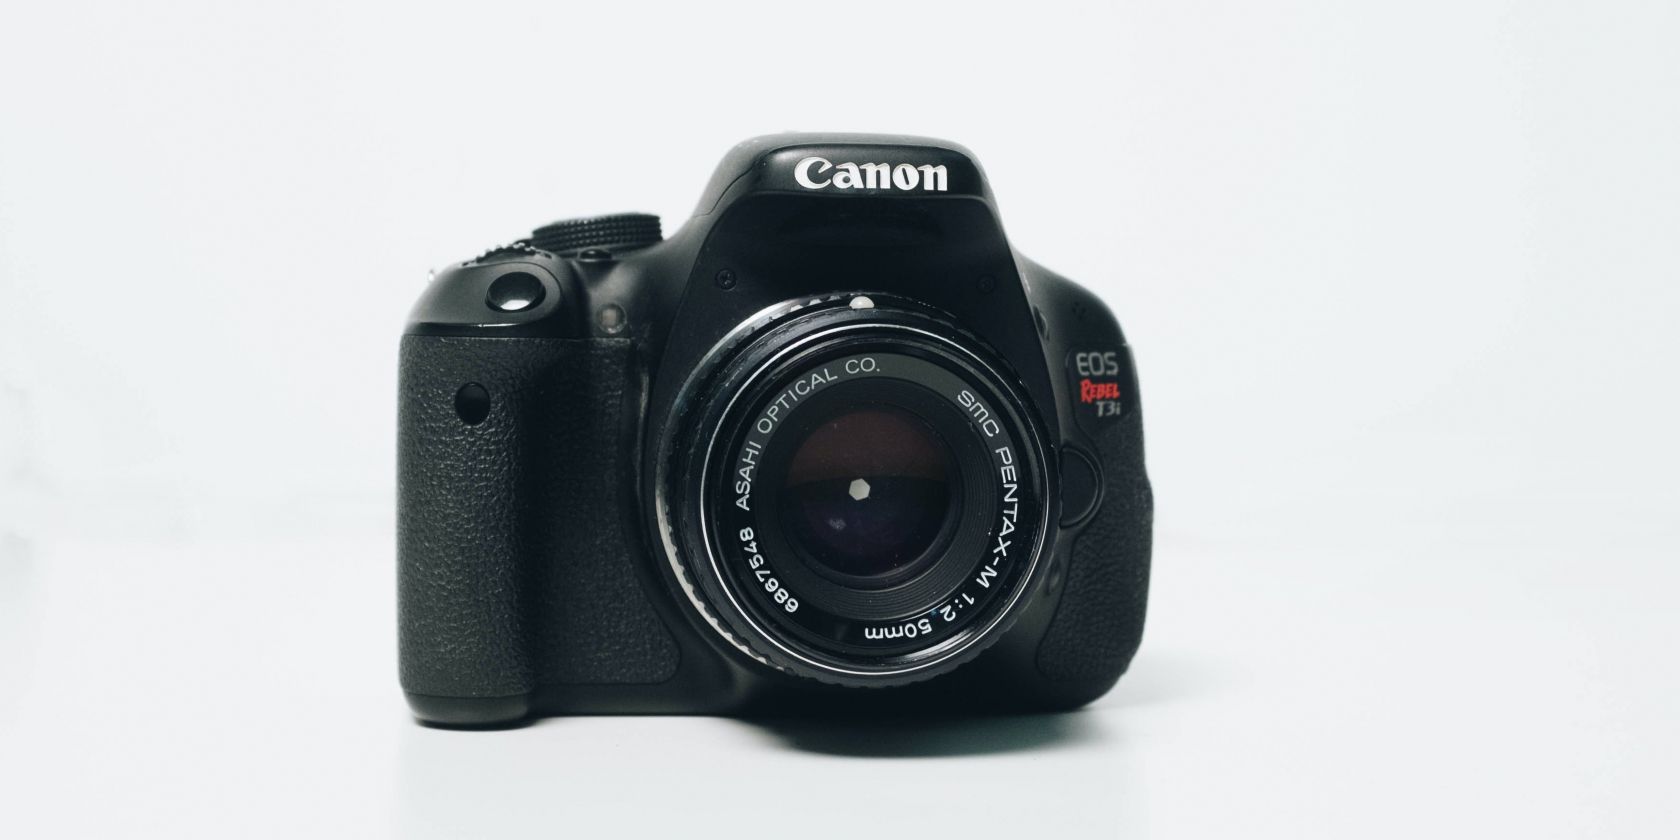 Photo of a Canon camera on a white background